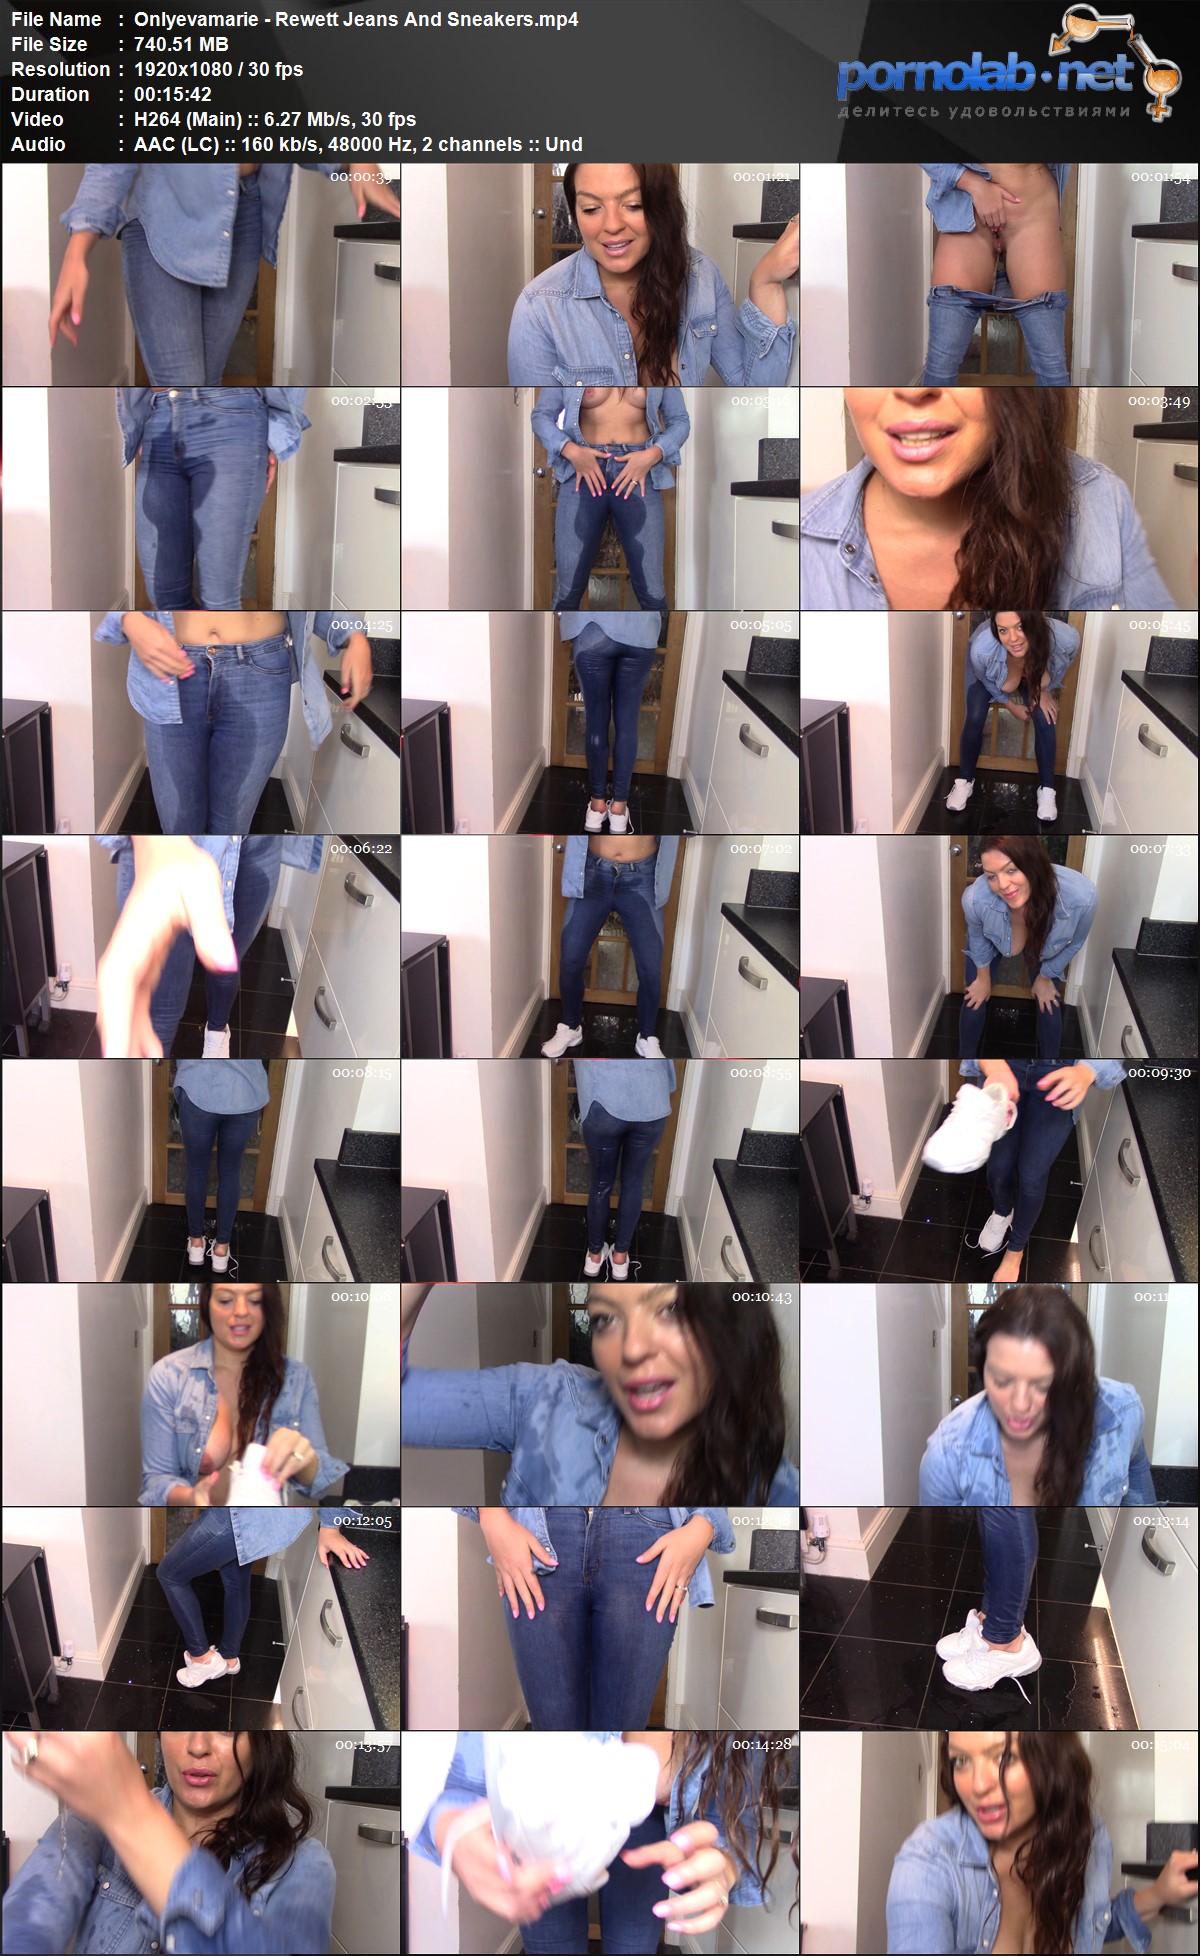 Onlyevamarie Rewett Jeans And Sneakers mp 4